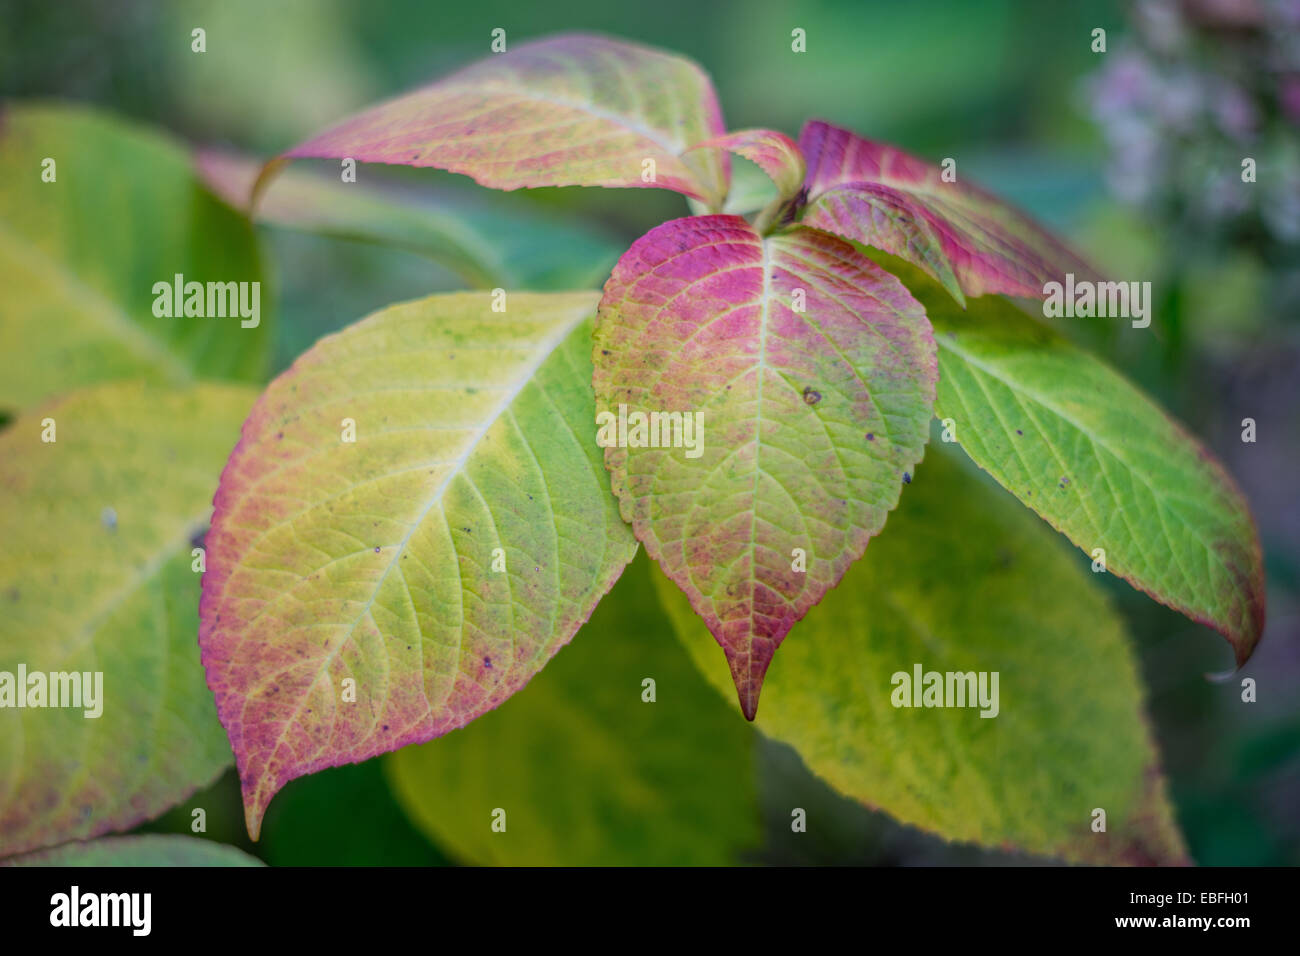 Hydrangea leaves photography and images - Alamy